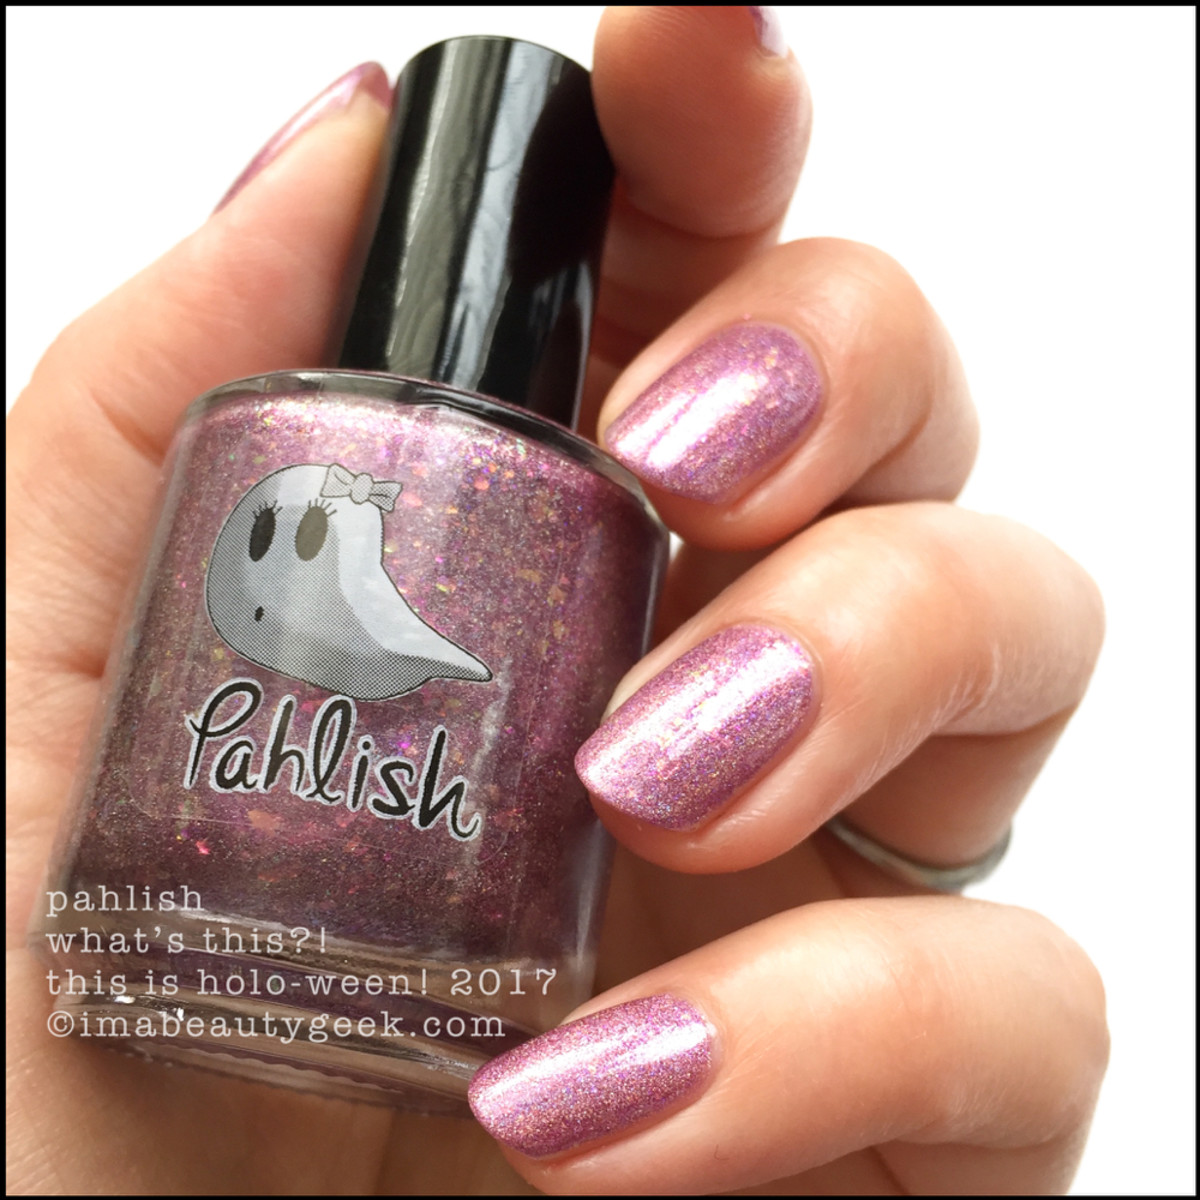 Pahlish What's This?! - This is Holo-ween! 2017